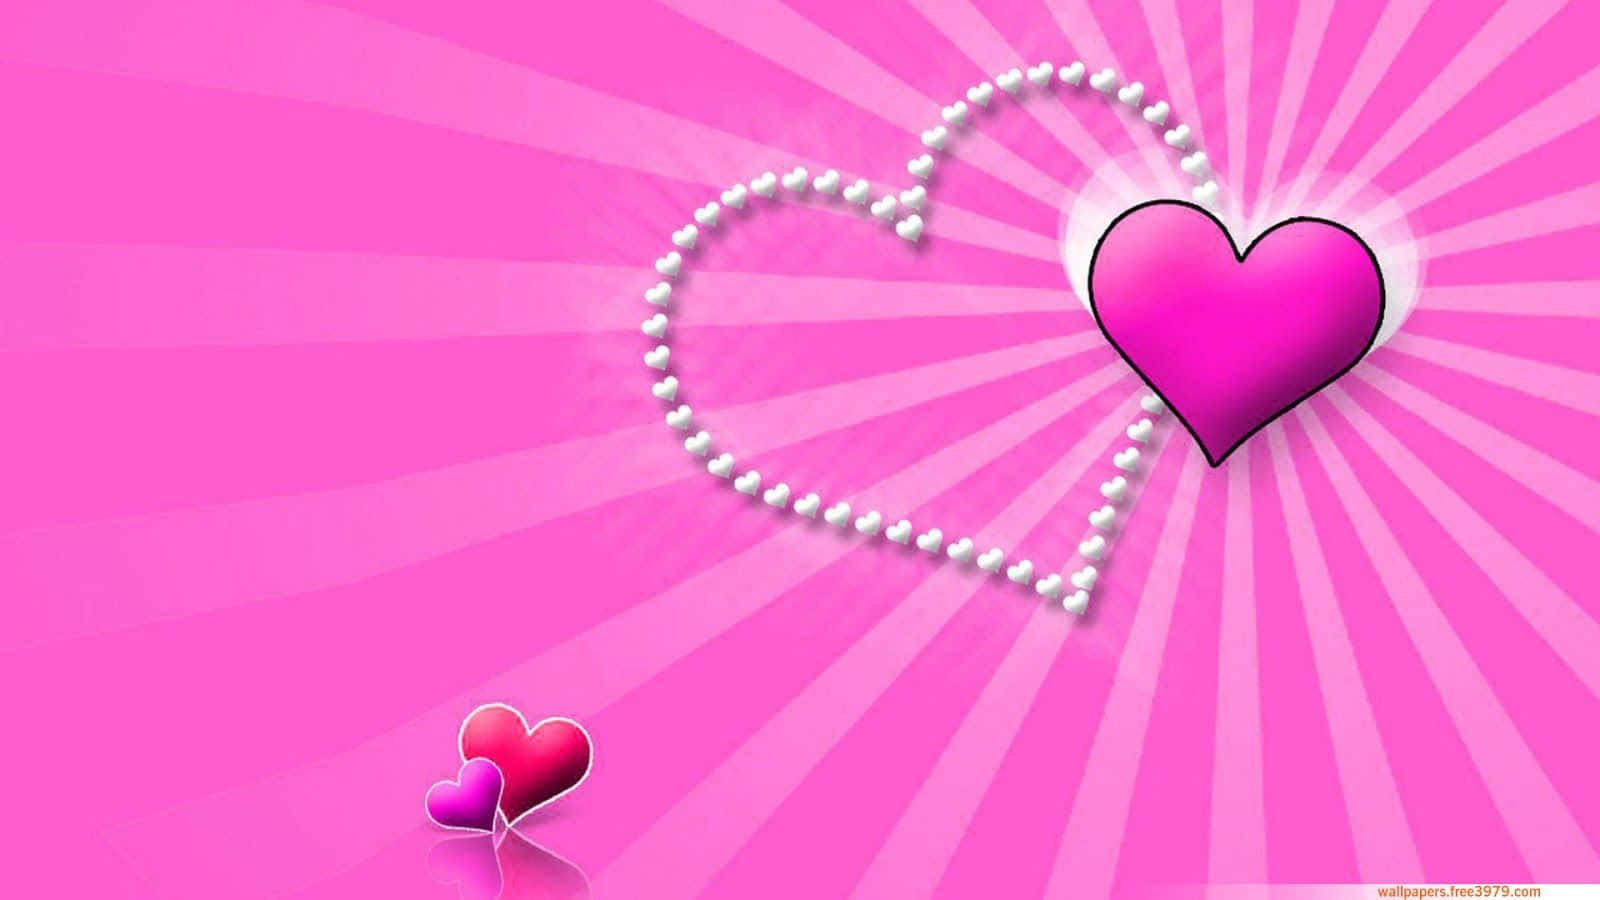 Celebrate love with a pink Valentine Day full of magical experiences Wallpaper